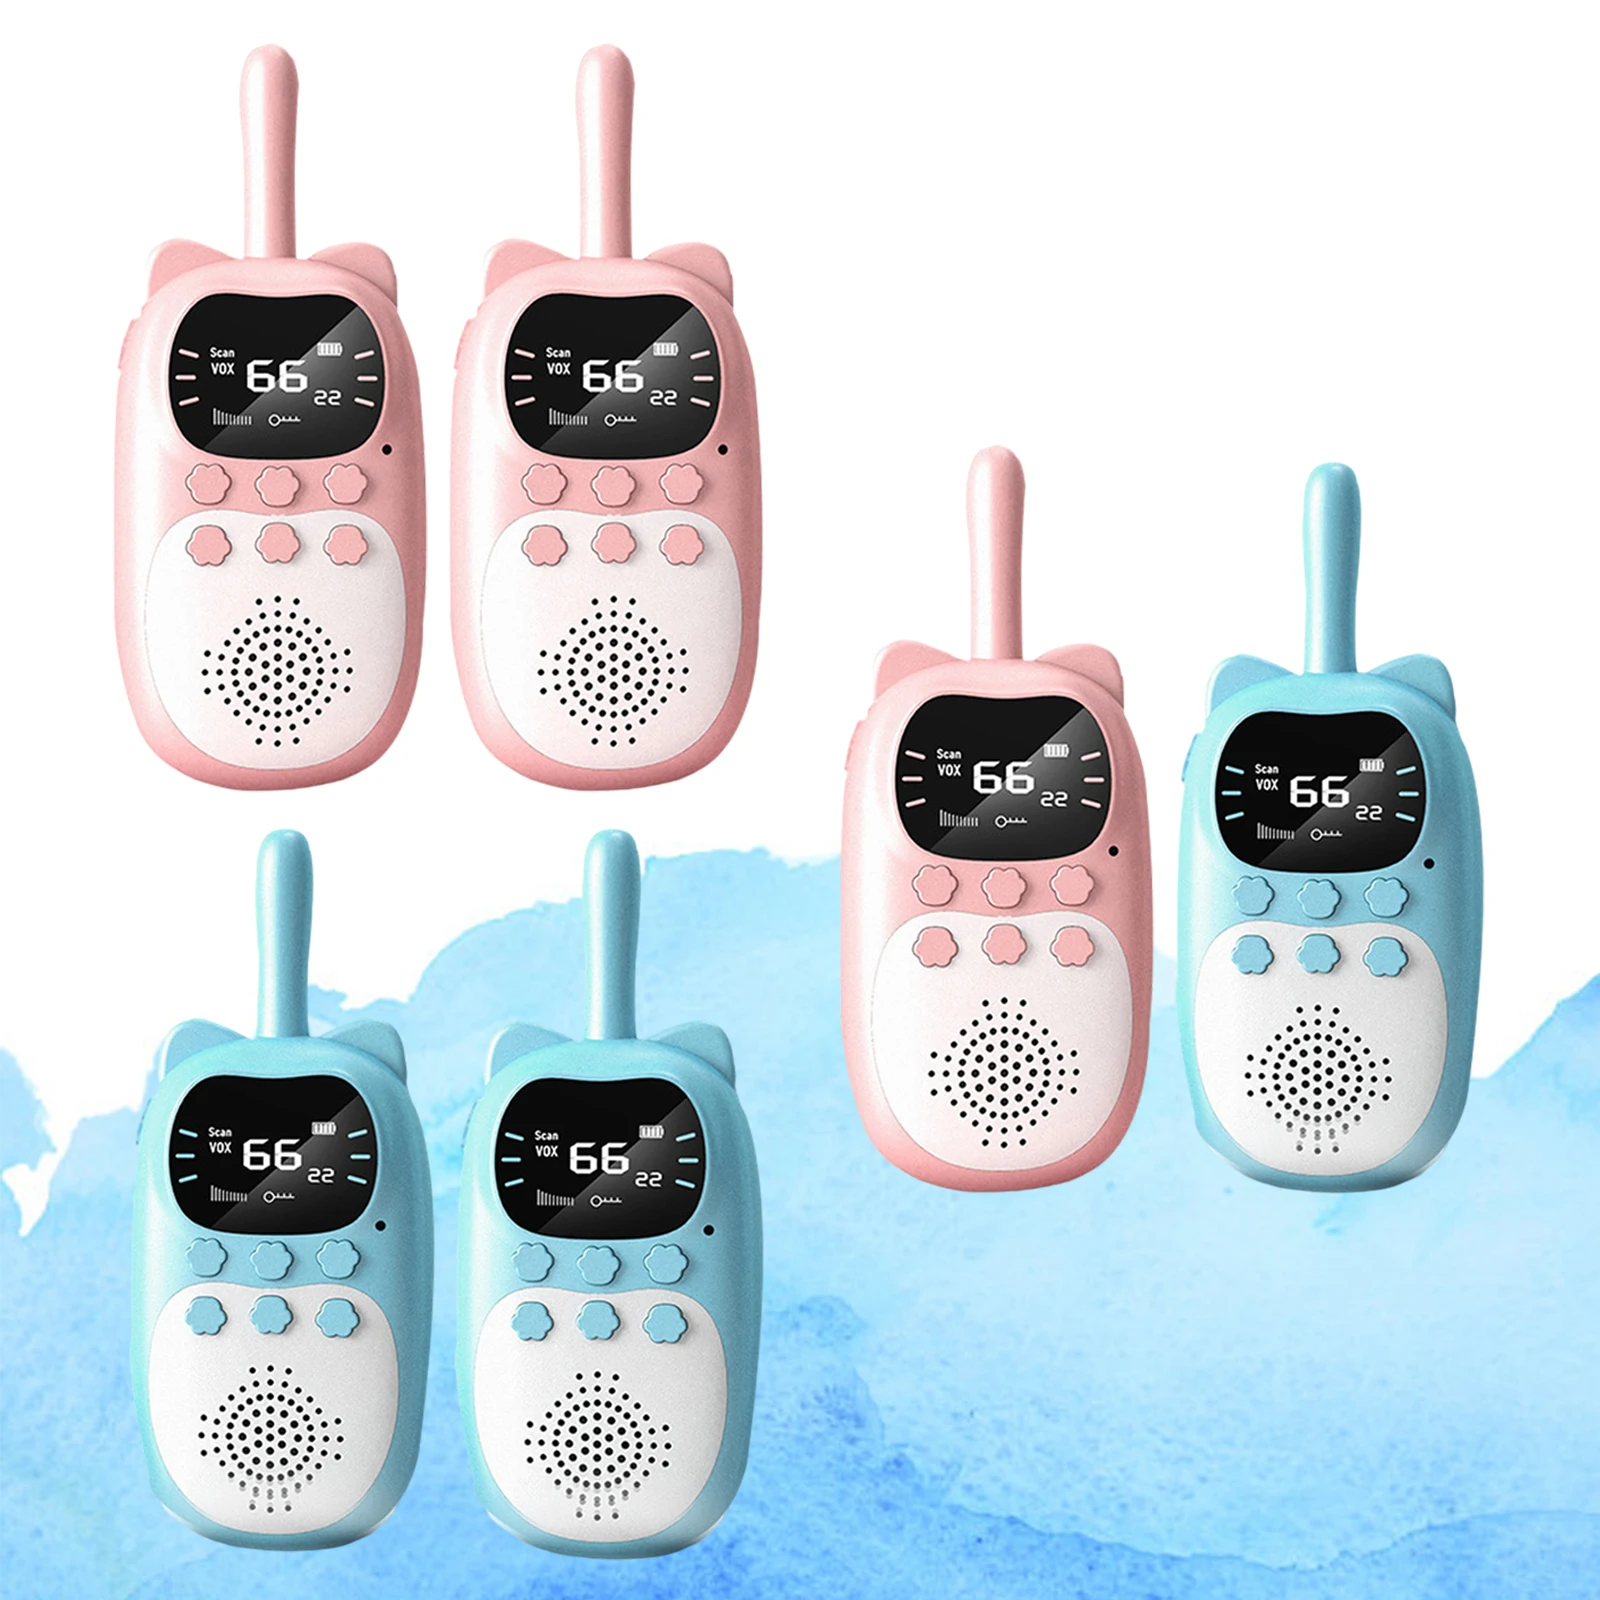 Plastic Wearable Kids Walkie Talkies LCD Toys Gifts for Children Fishing